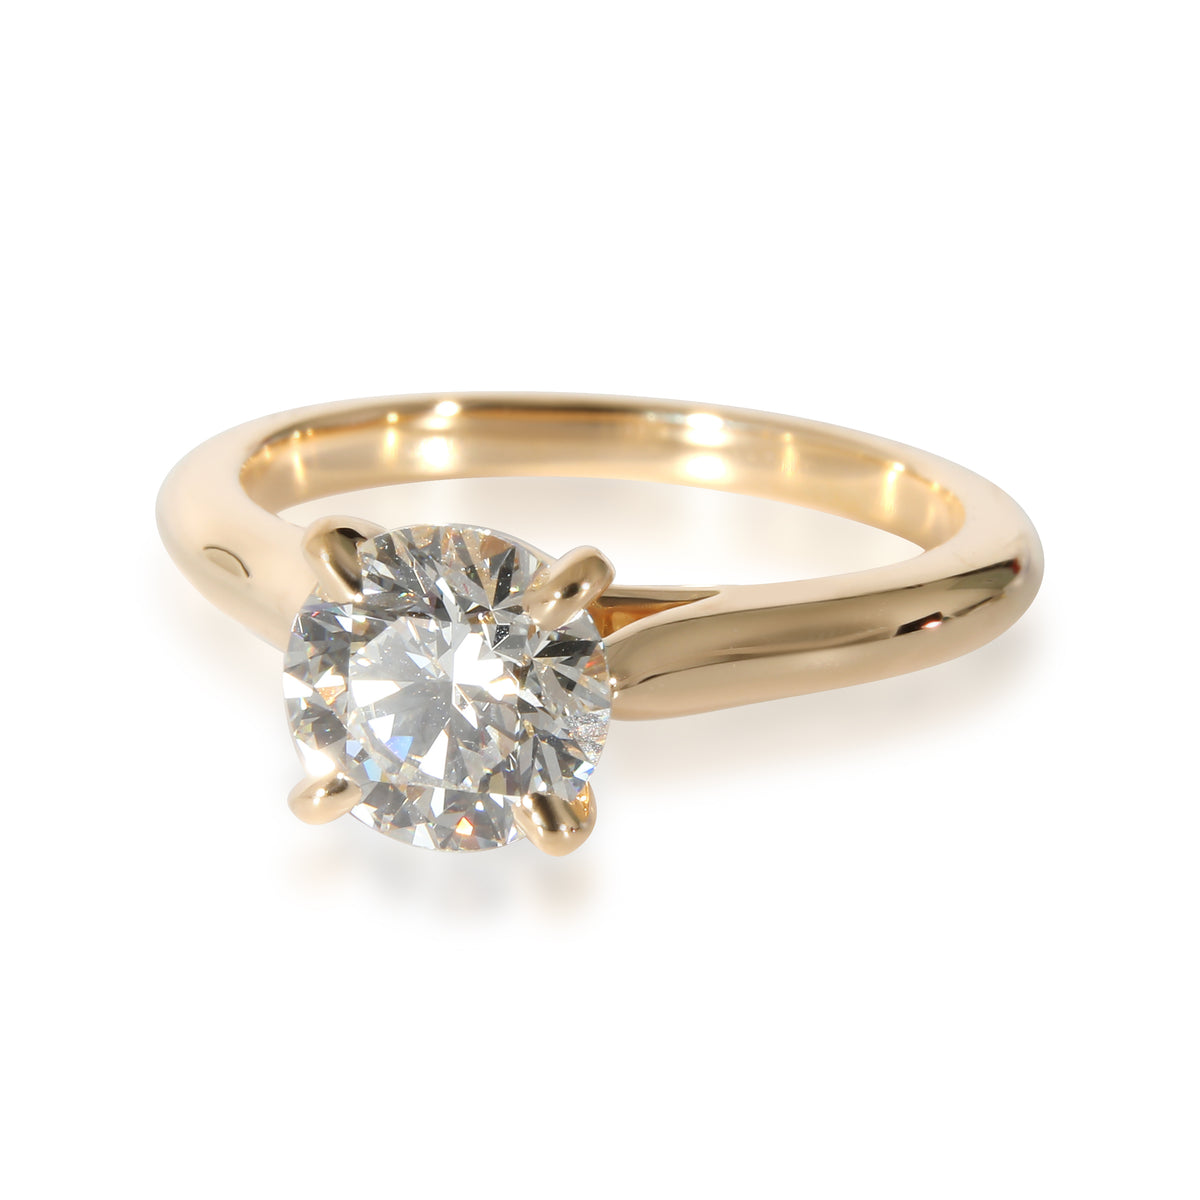 Cartier 1895 Engagement Ring in 18k Yellow Gold H VS2 1.33 CTW